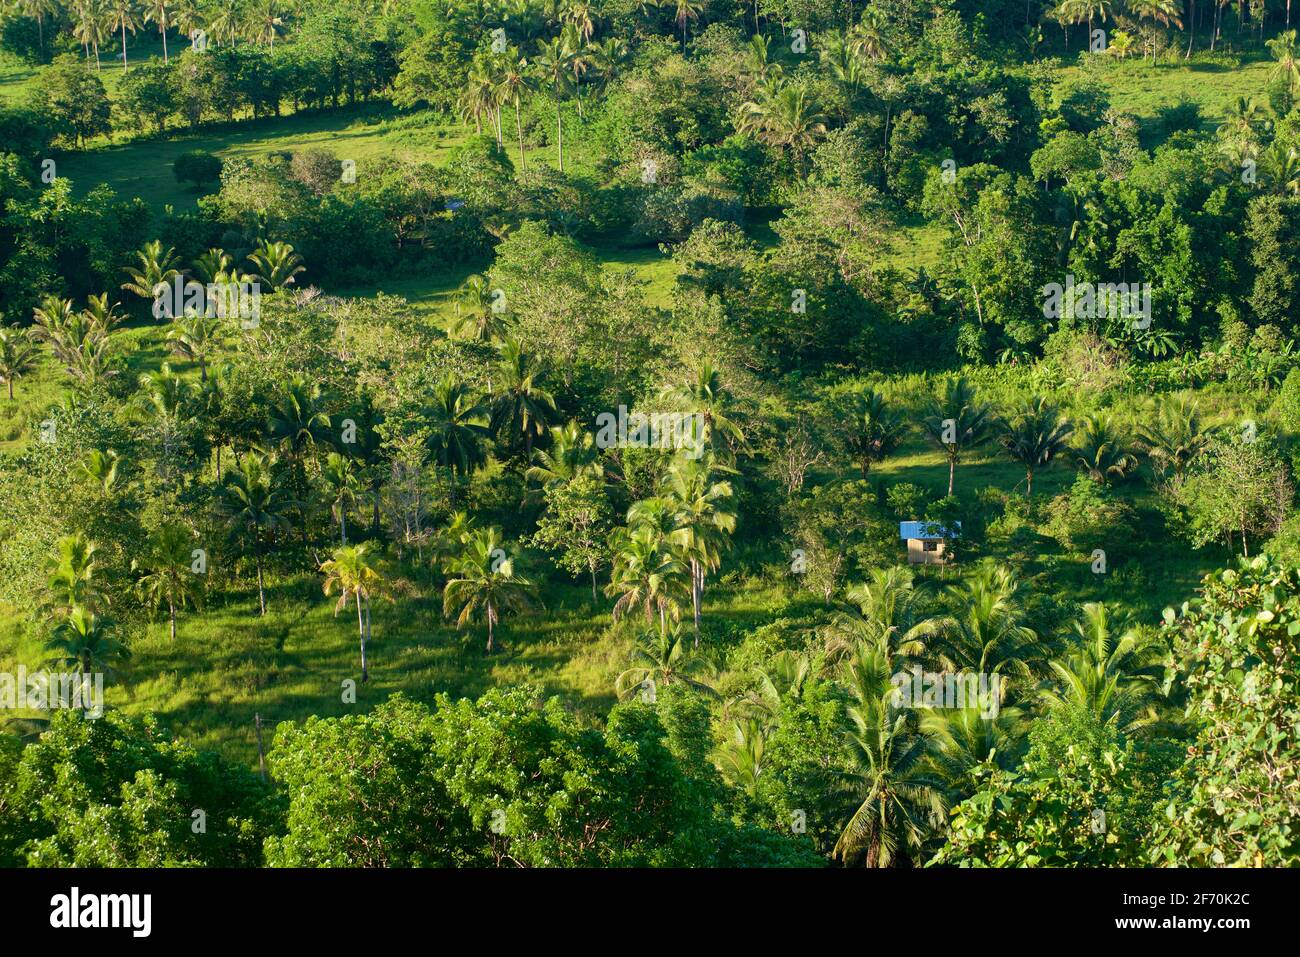 Lush vegetation in the 'Chocolate Hills', Carmen, Bohol province, Philippines, SE Asia. Isolated wooden hut. Stock Photo